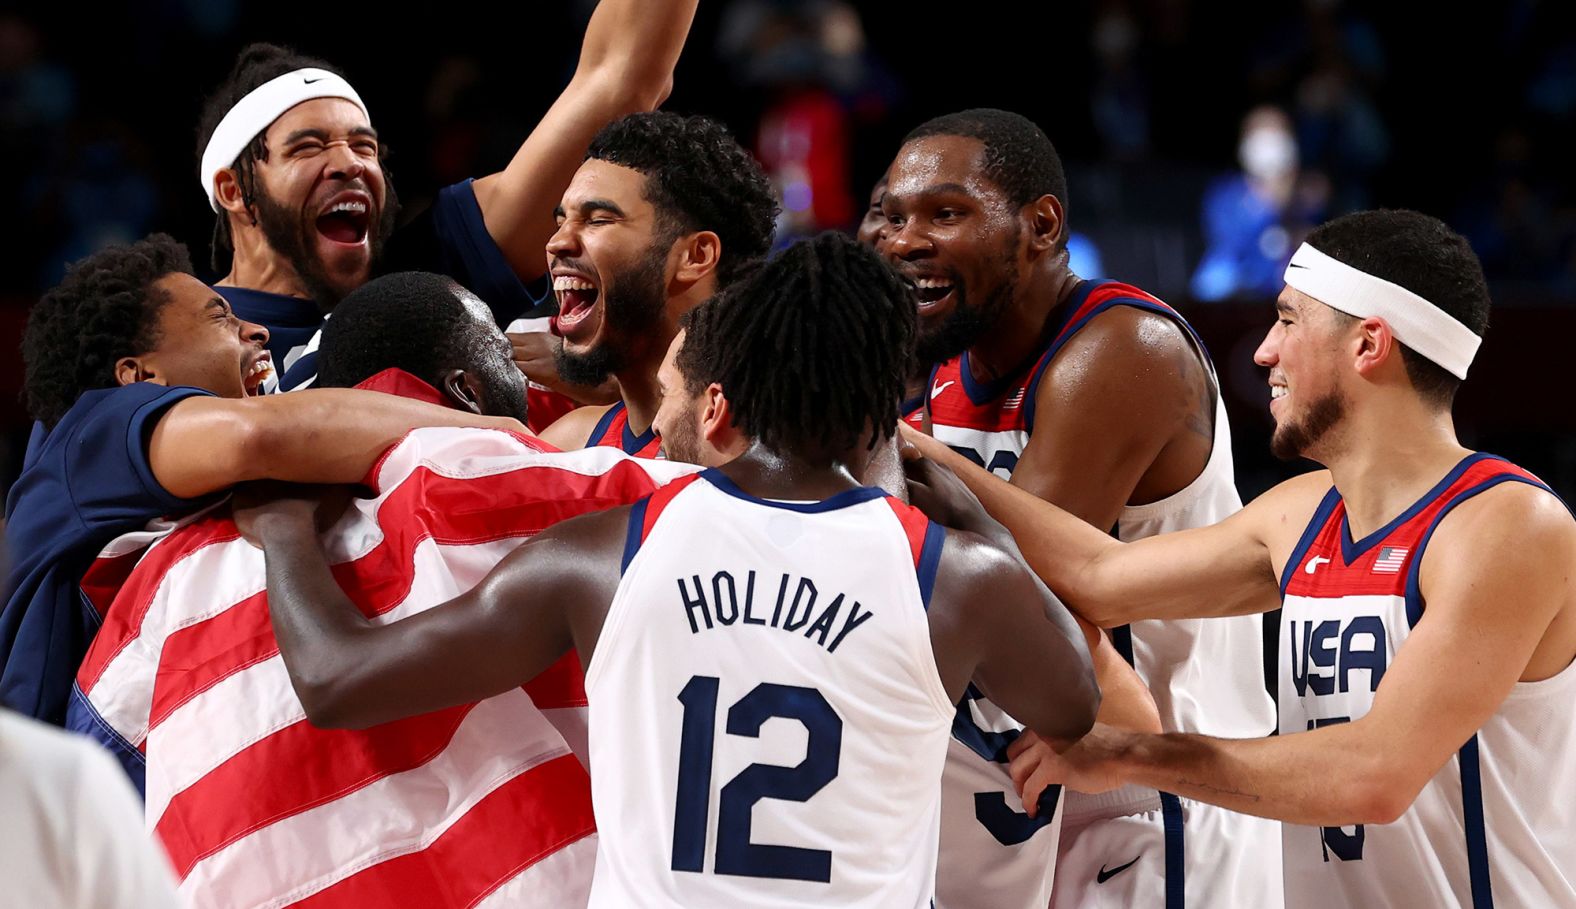 US basketball players celebrate after <a href="index.php?page=&url=https%3A%2F%2Fwww.cnn.com%2Fworld%2Flive-news%2Ftokyo-2020-olympics-08-07-21-spt%2Fh_fbb5e6e6f9790e71f12c0994183a4819" target="_blank">defeating France 87-82 in the gold-medal game</a> on August 7. It's the Americans' fourth straight gold in men's basketball.